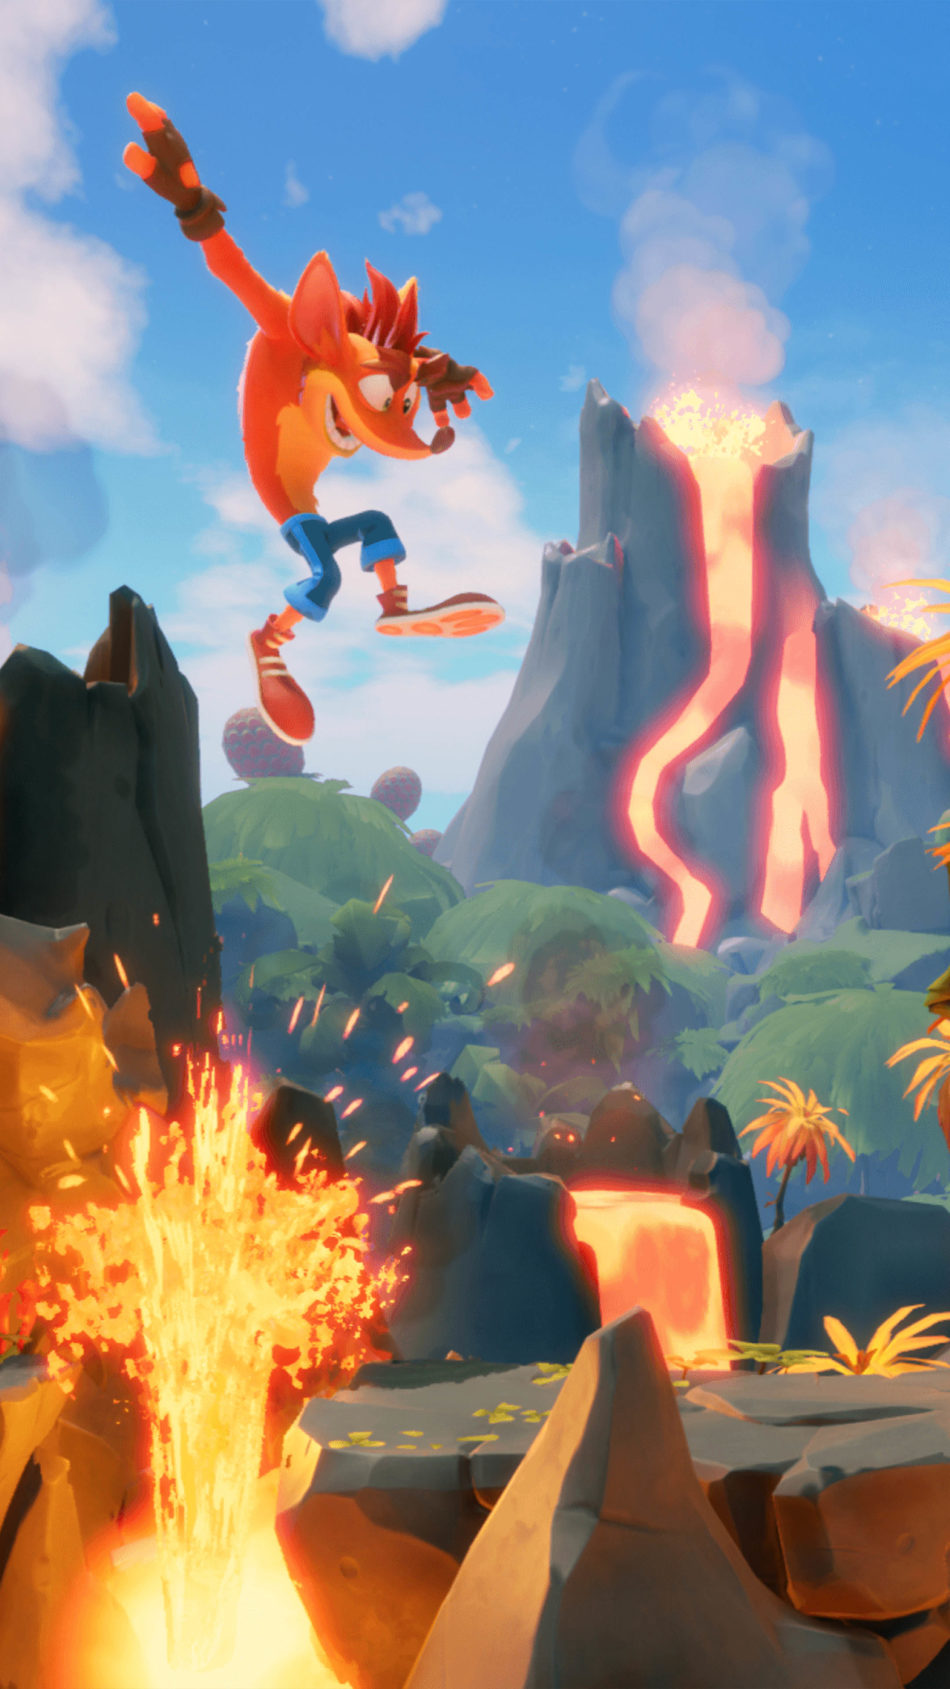 Crash Bandicoot 4 It’s About Time Gameplay 4K Ultra HD Mobile Wallpaper